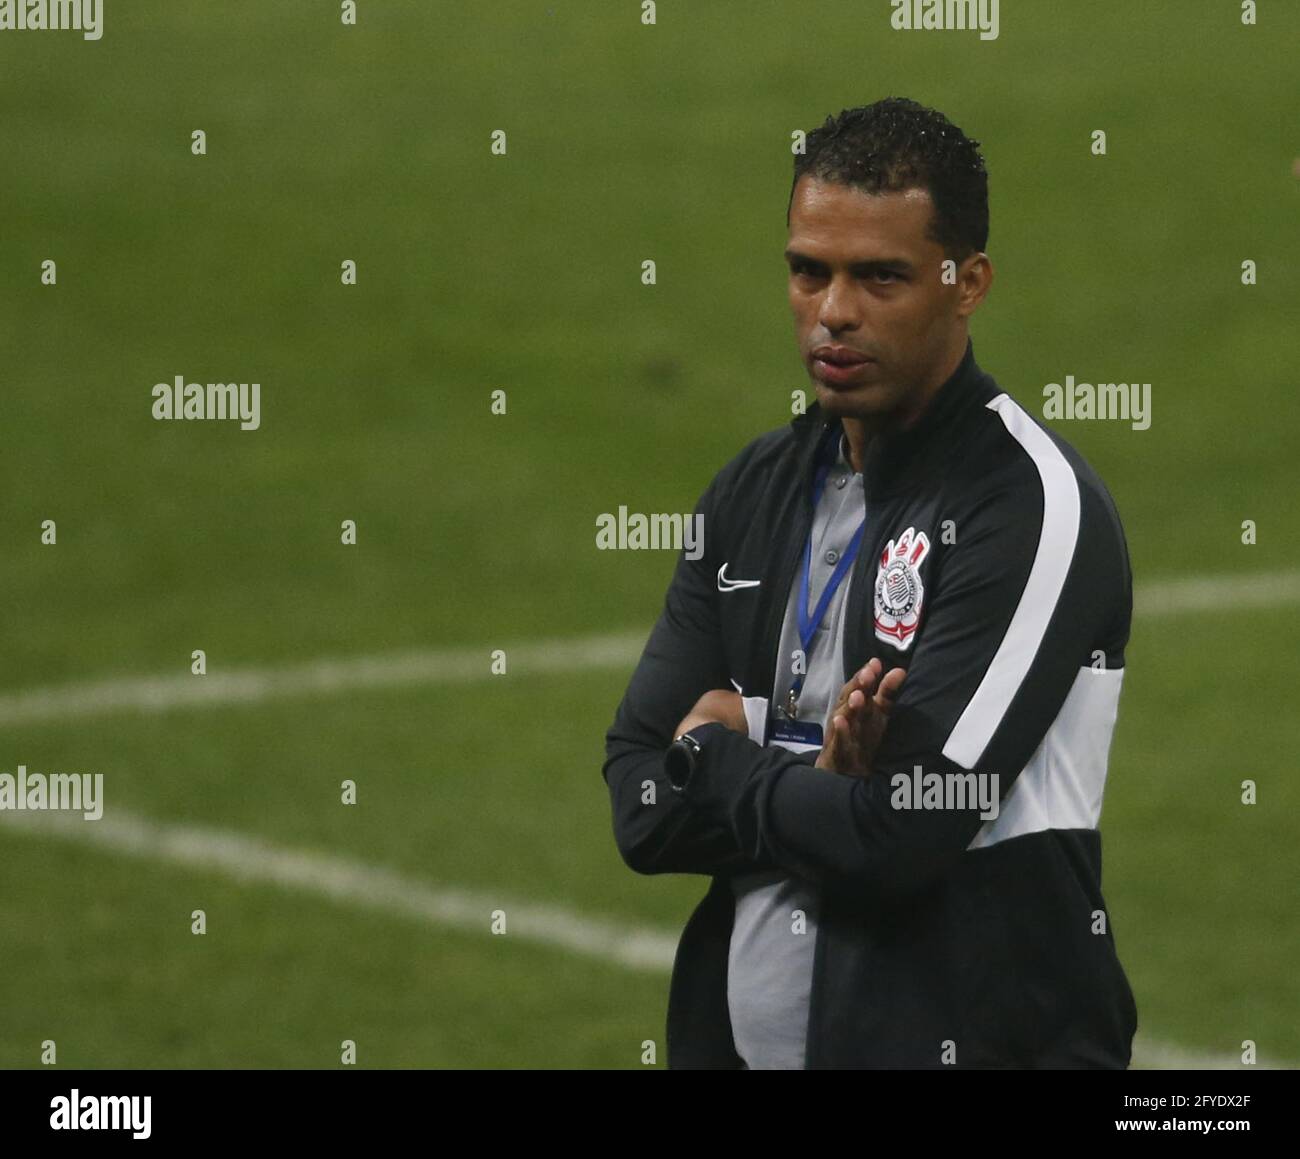 Corinthians caretaker manager Fernando (Corinthians have now appointed Silvinho as their new manager) during the Copa Sulamericana football match between Corinthians (Brazil) v River Plate (Paraguay) at the Neo Quimica Arena in